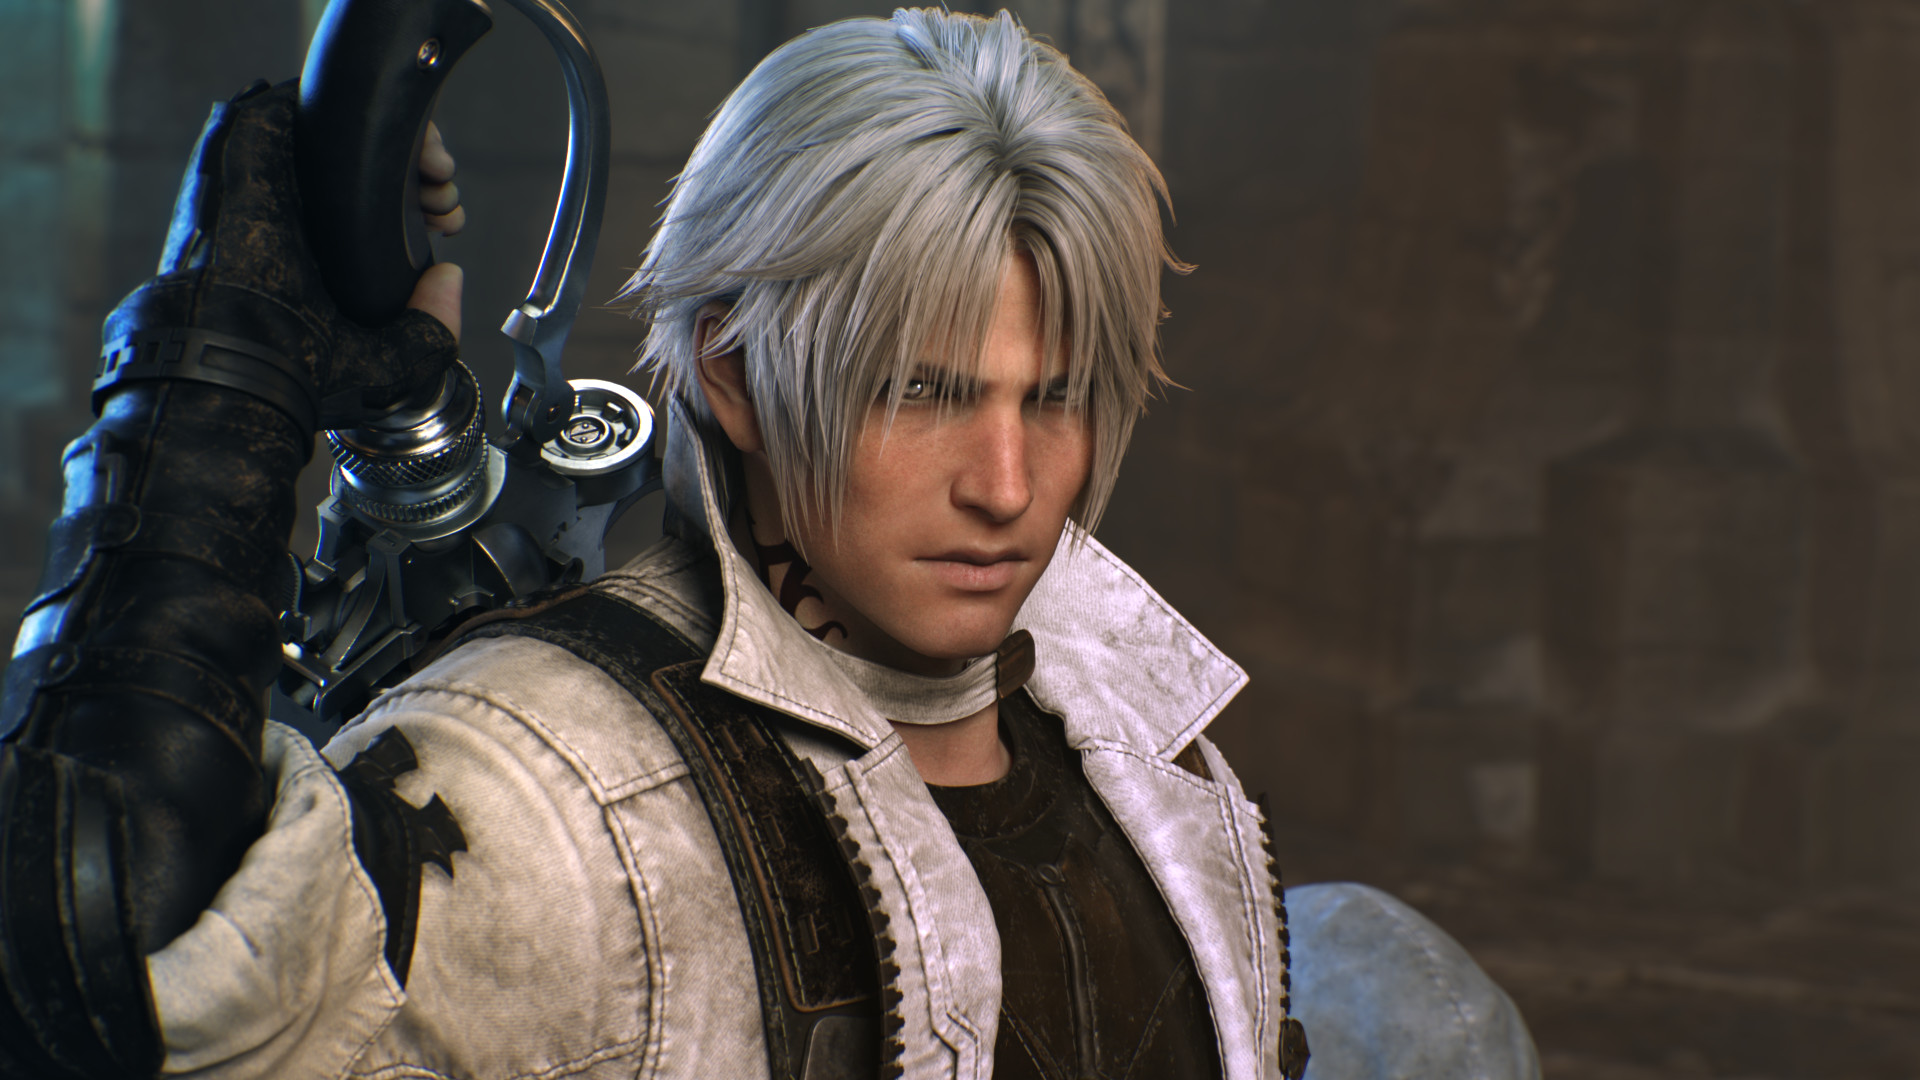  How to watch tonight's Final Fantasy 14 expansion reveal livestream 